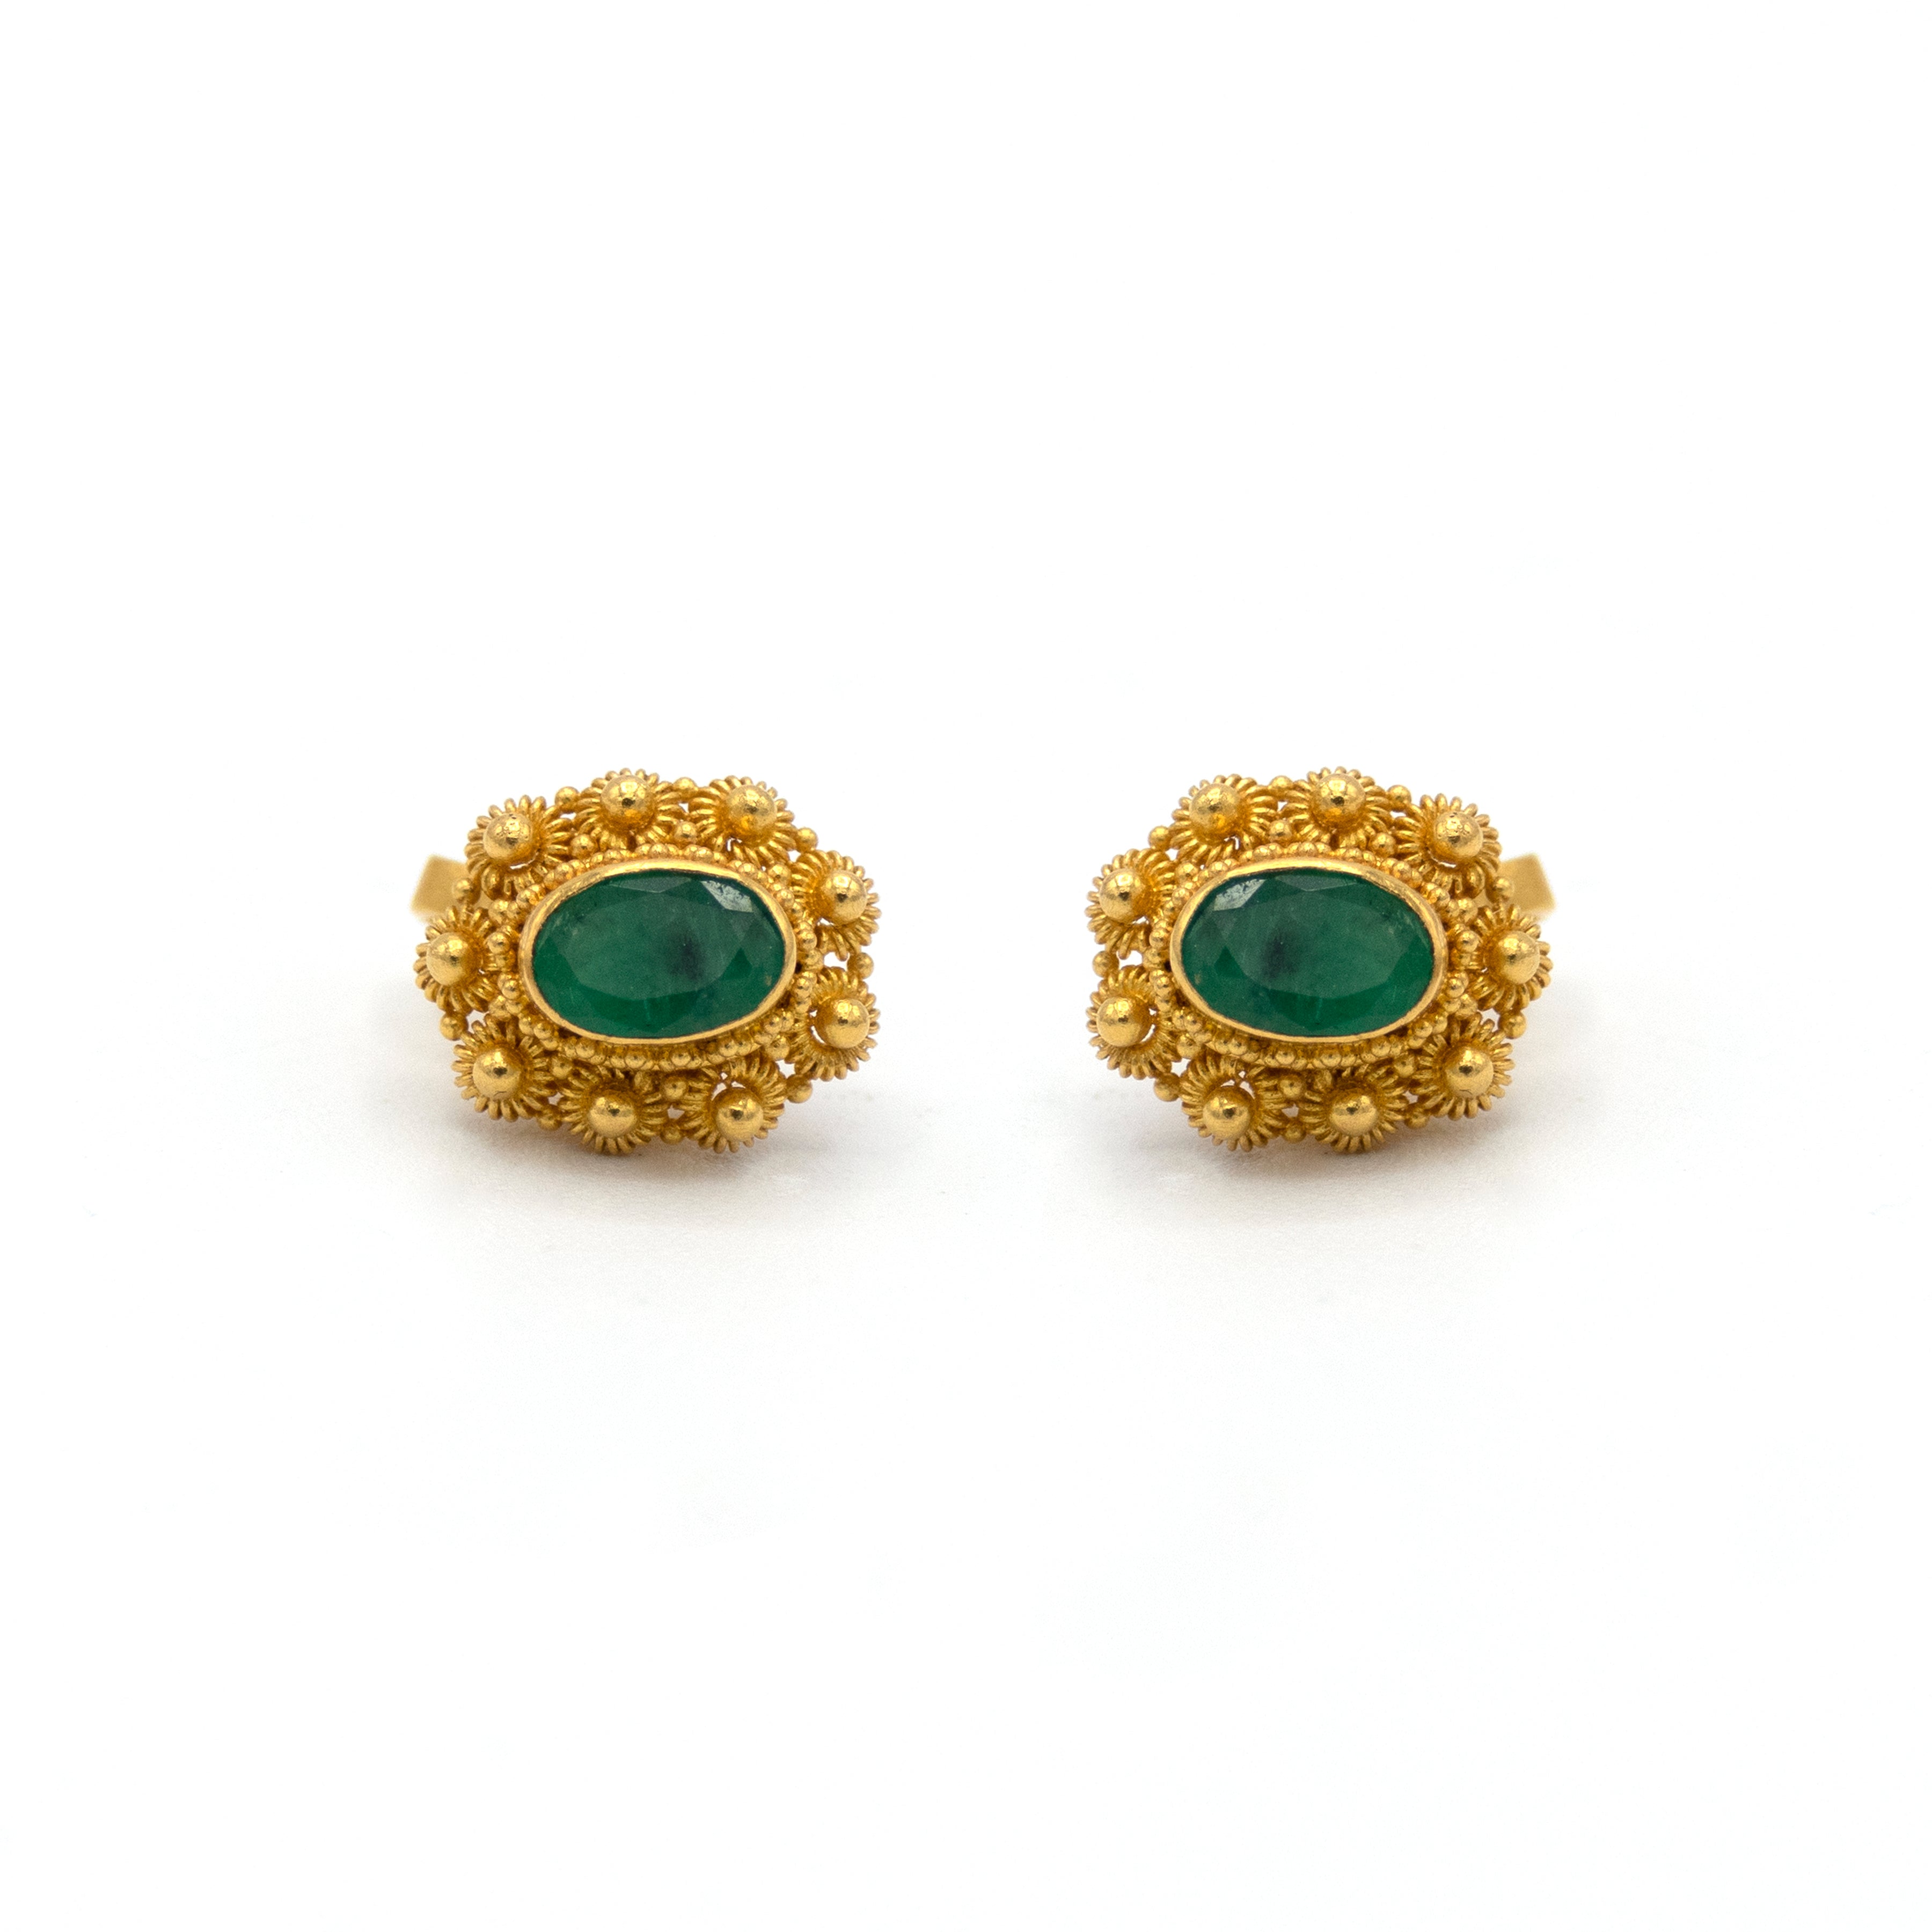 22K Gold and Emerald Earrings